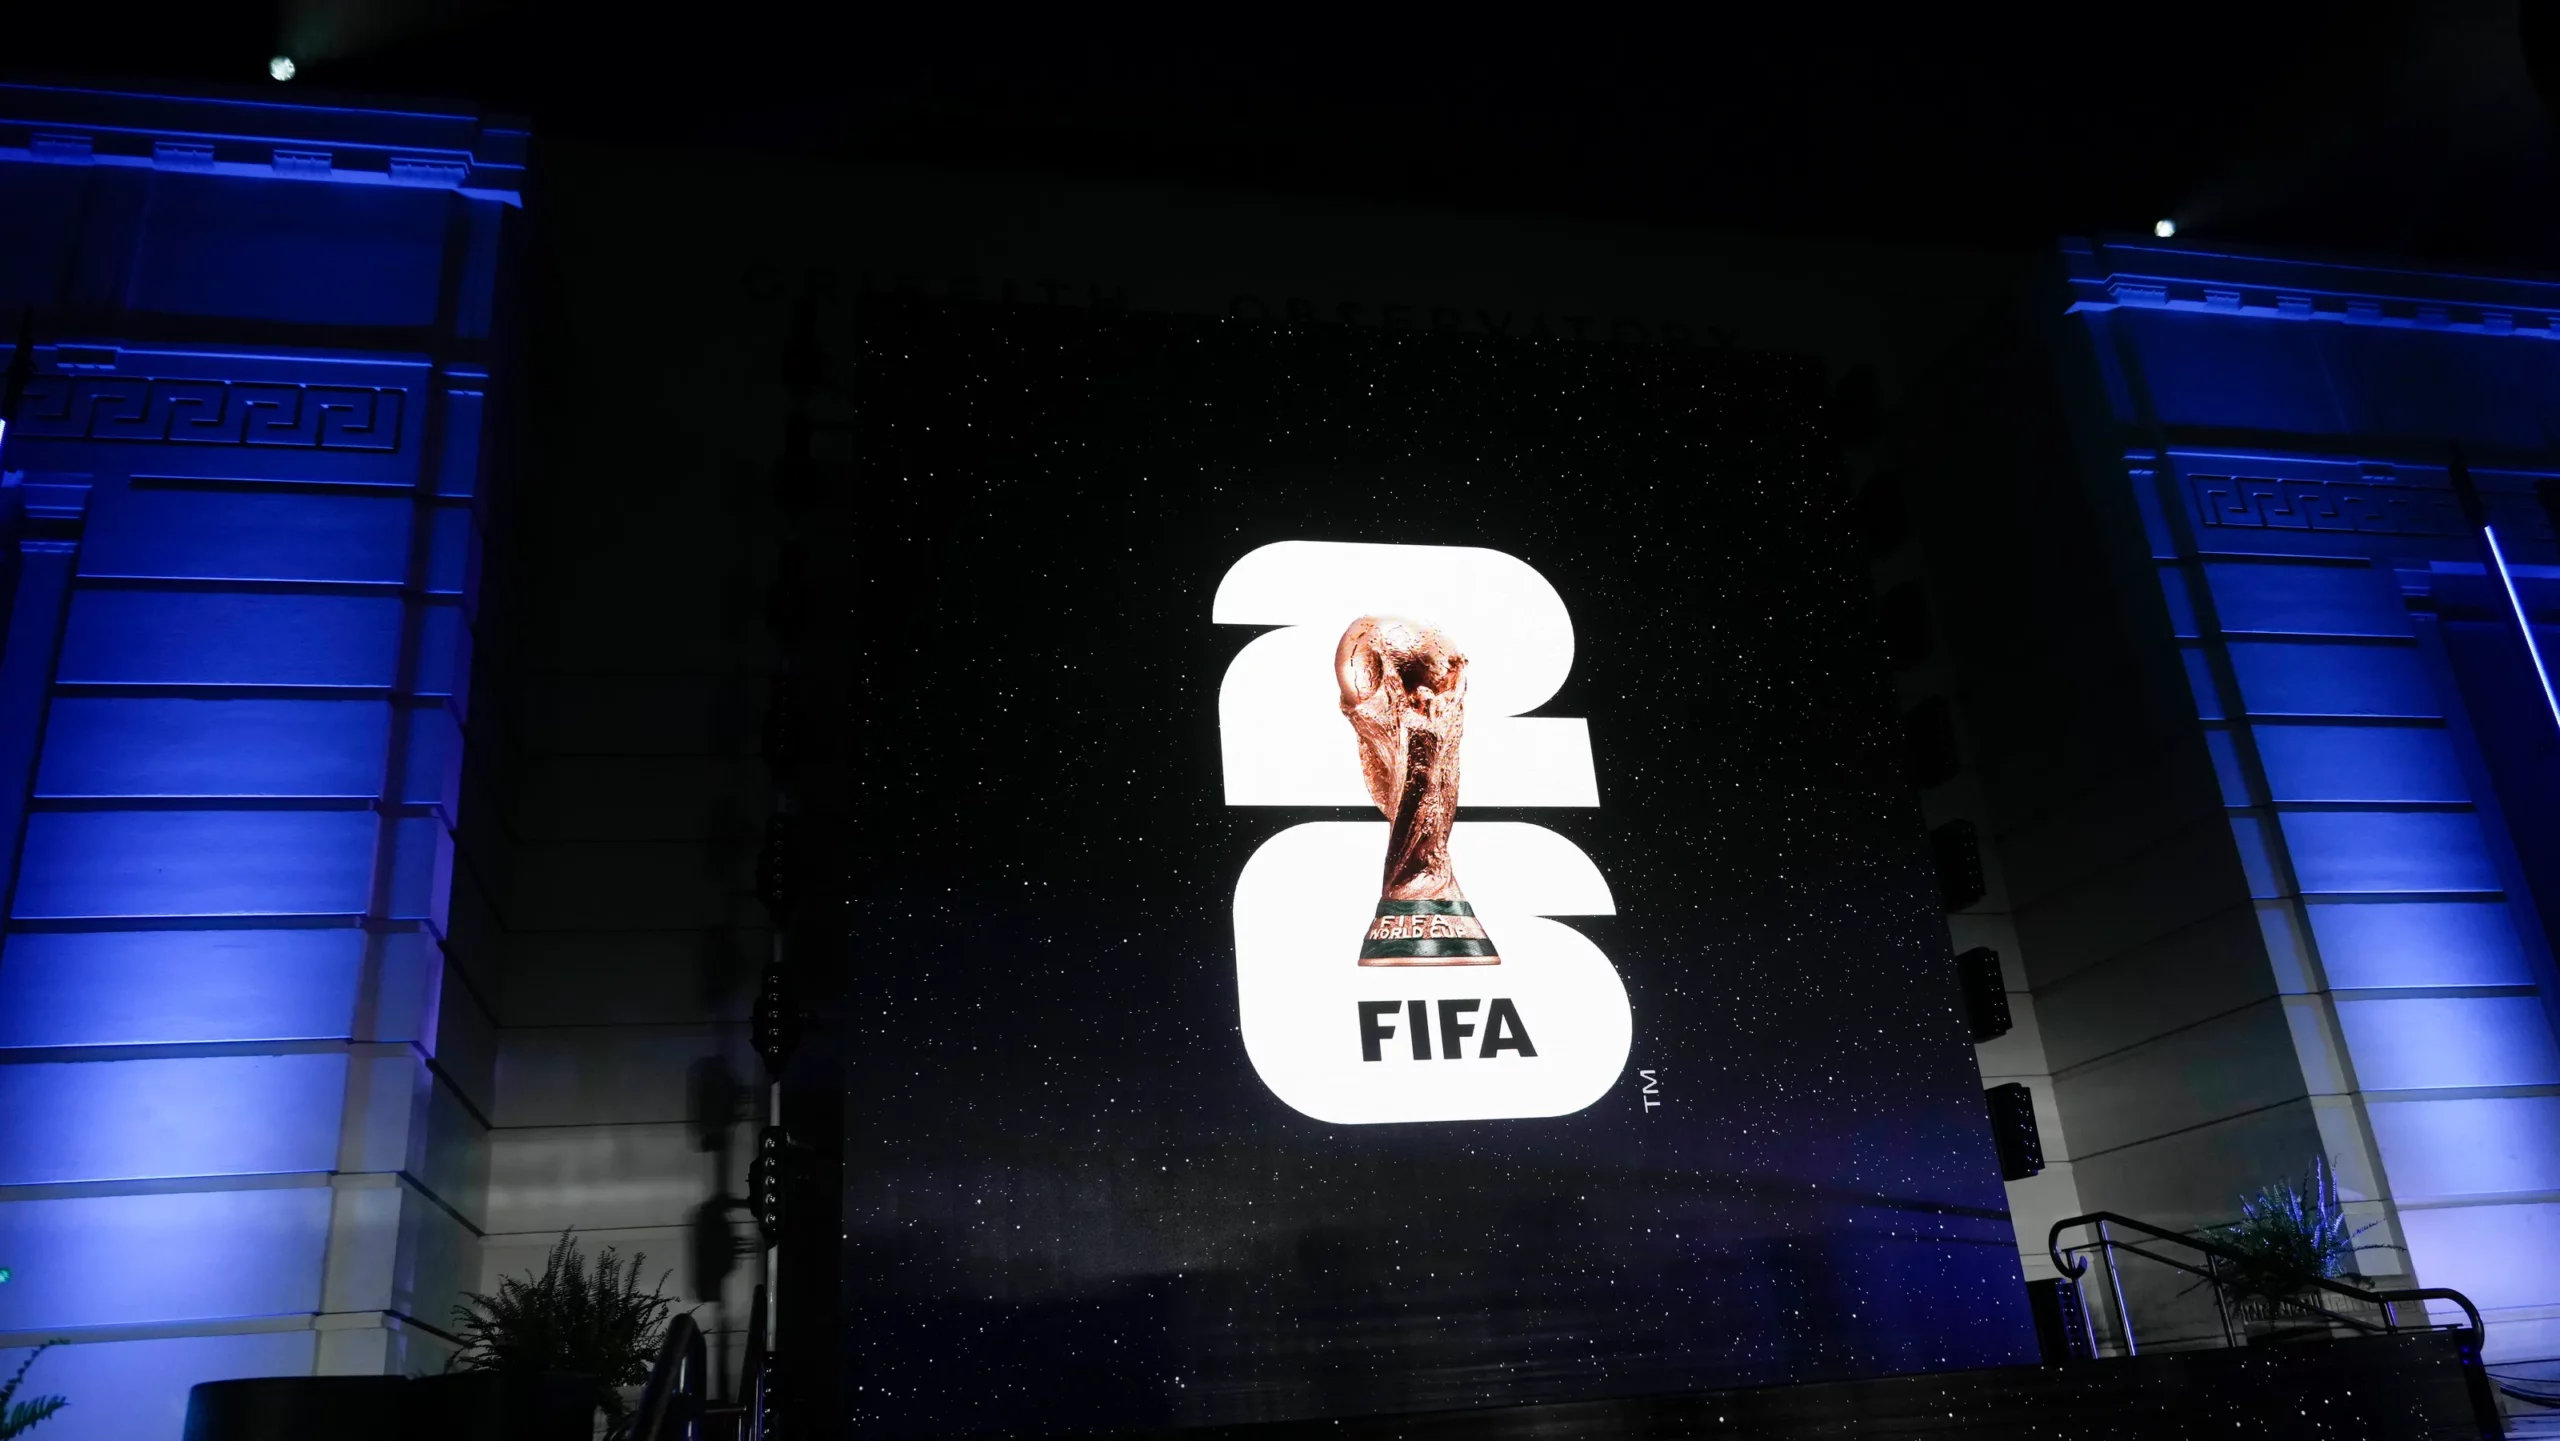 2026 World Cup Forecast: Weather-wise Expectations for the Event